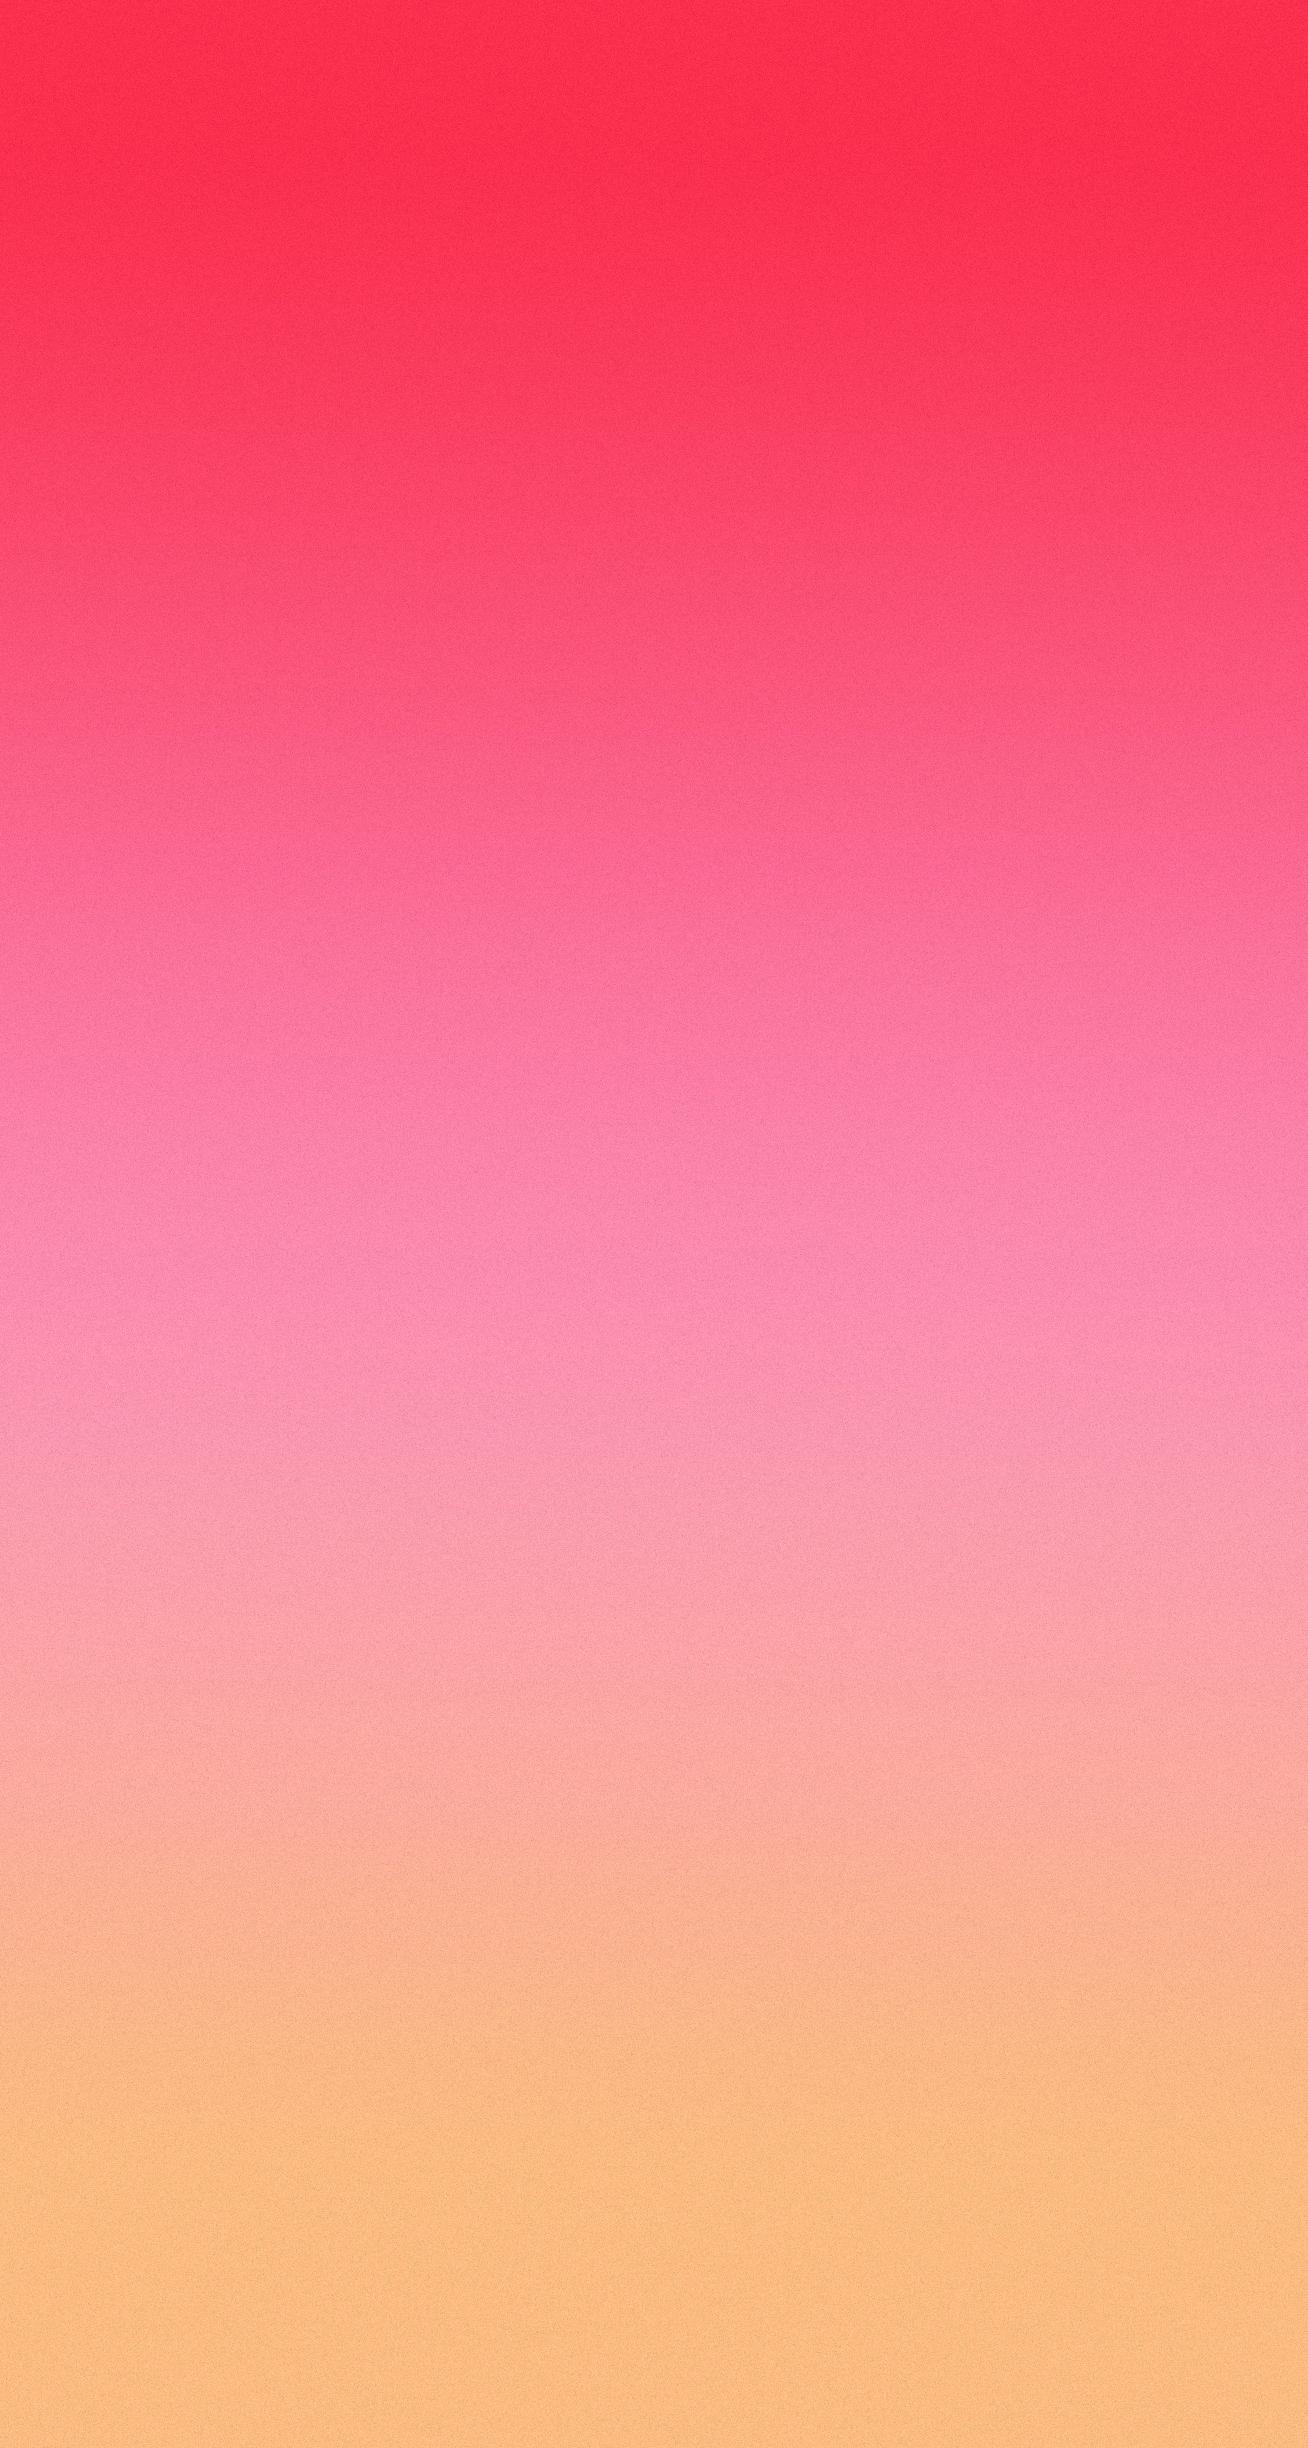 Valentines Day wallpaper from Apple store site